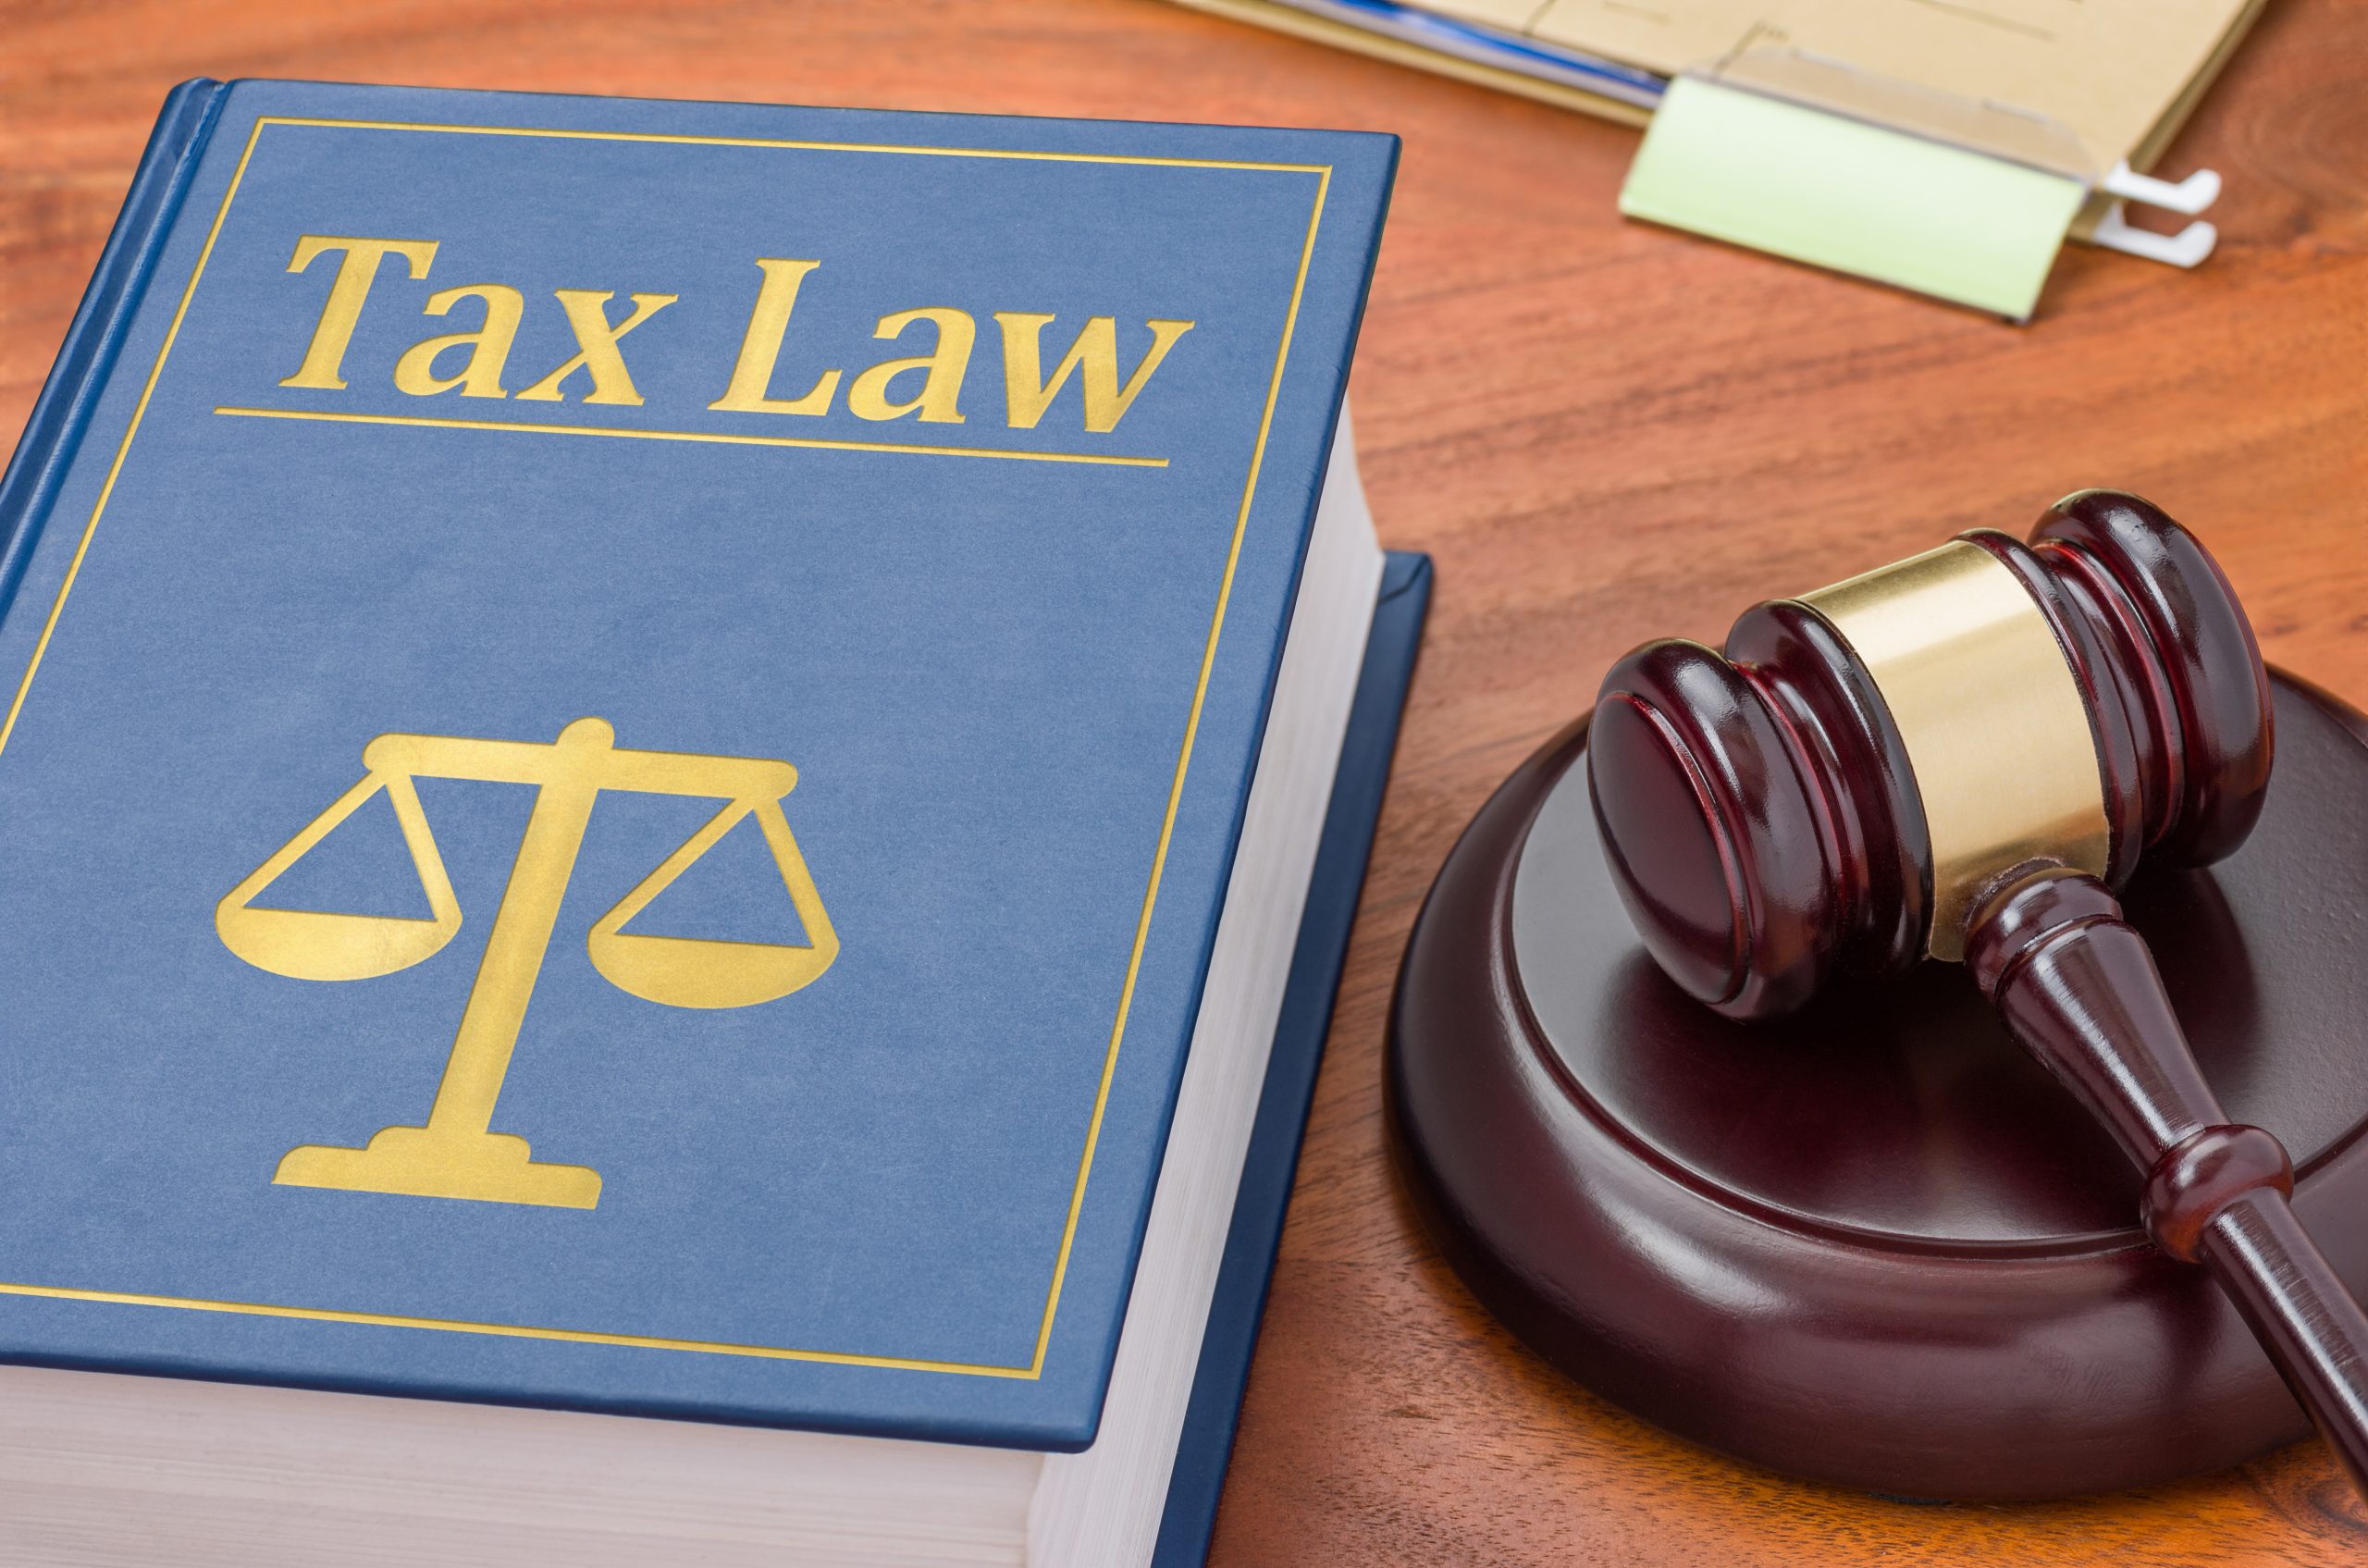 DC Tax Lawyers Washington DC Legal Article Featured Image by Antonoplos & Associates